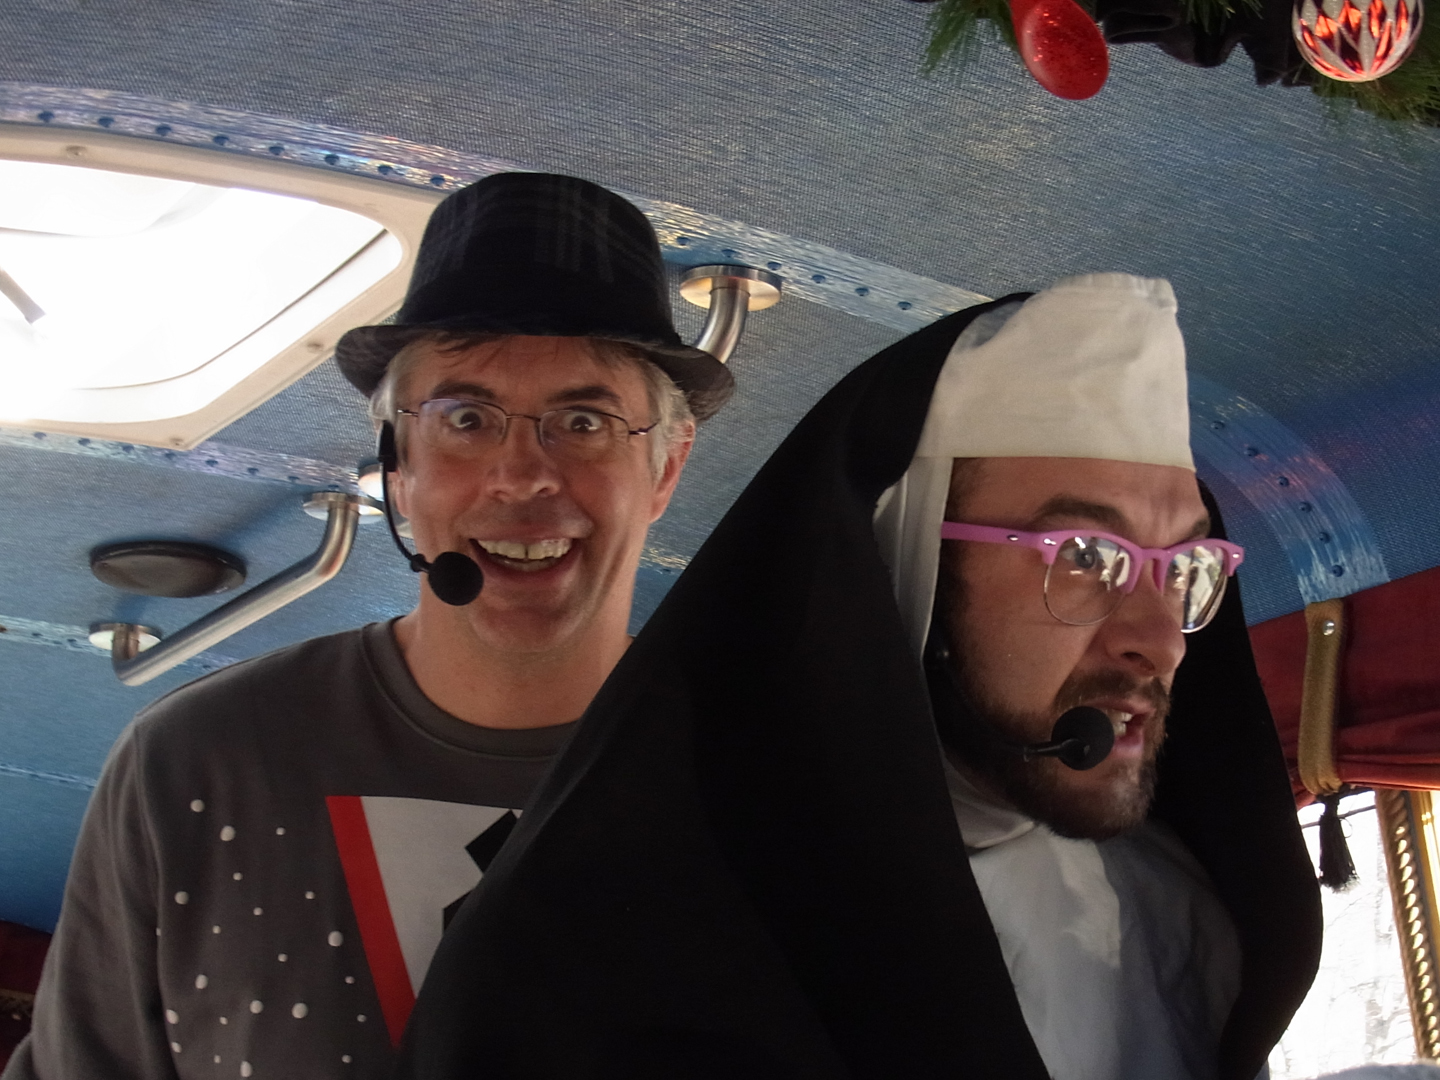 Our Guide and the Naughty Nun